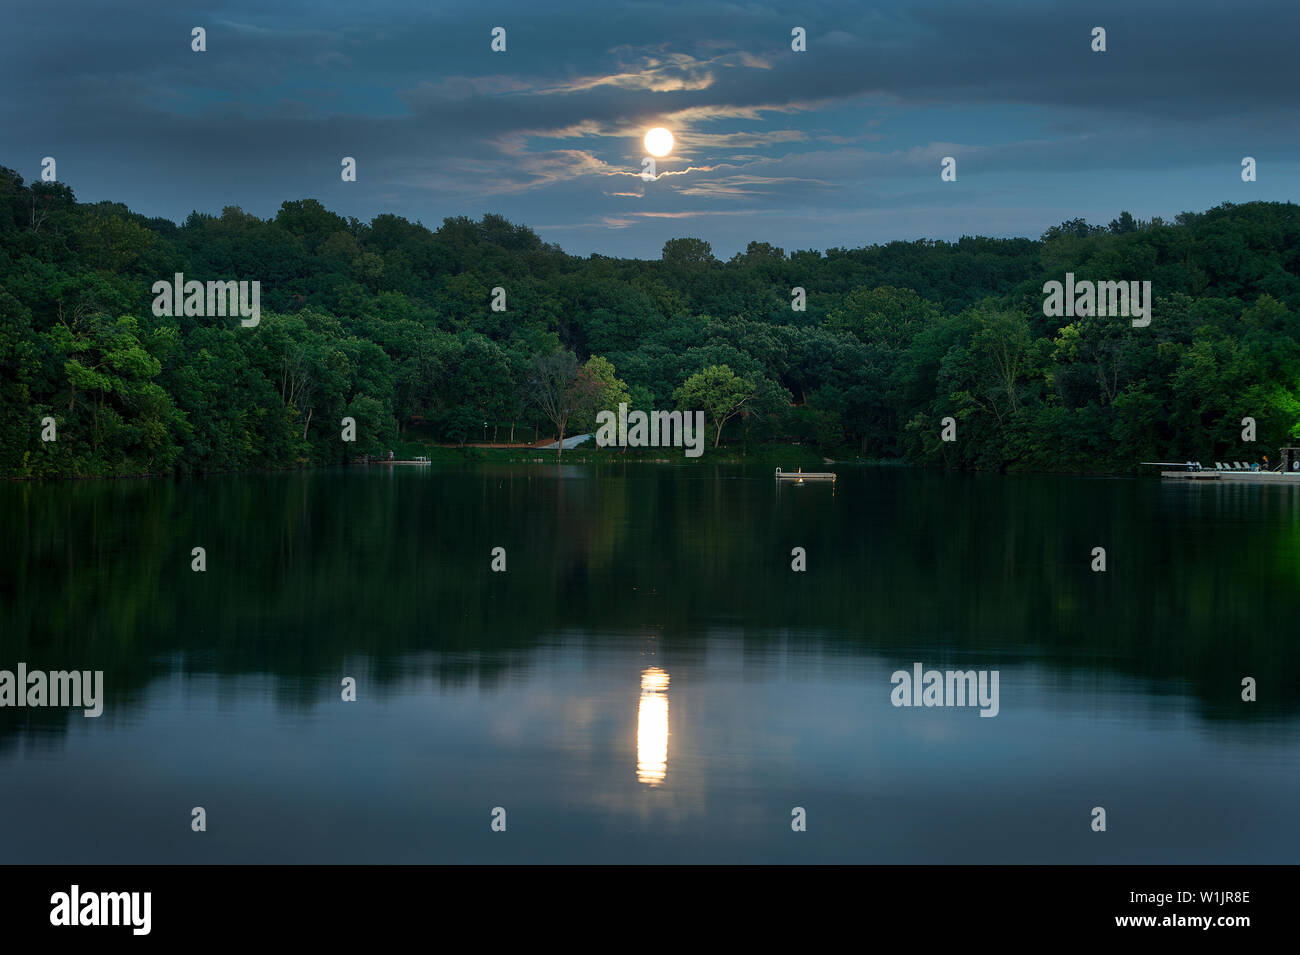 A super moon full moon rises over the still waters of Black Swan Lake in  Shawnee Mission, Kansas just west of Kansas City. (c) 2014 Tom Kelly Stock  Photo - Alamy